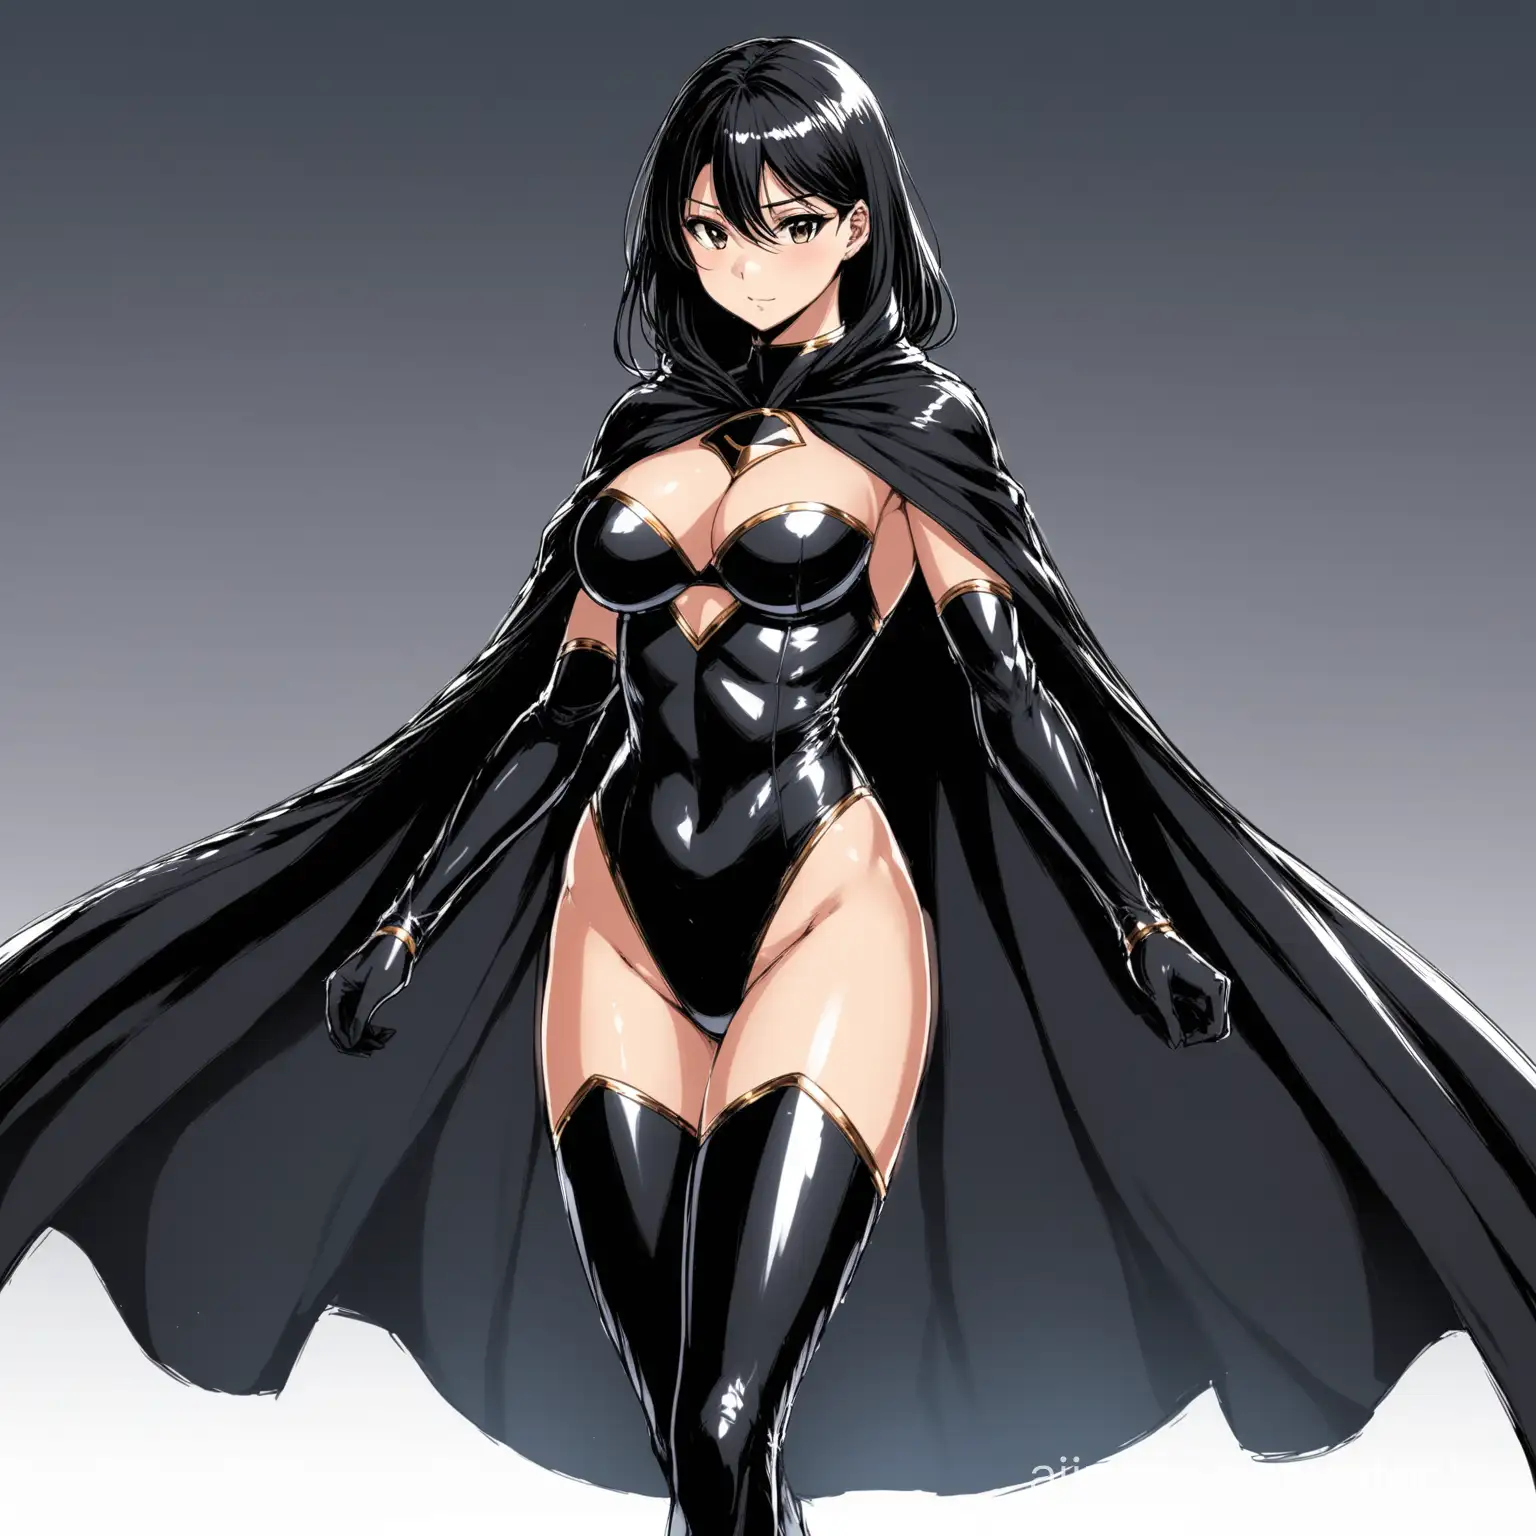 Sultry-Anime-Superheroine-in-Black-Costume-with-Flowing-Cape